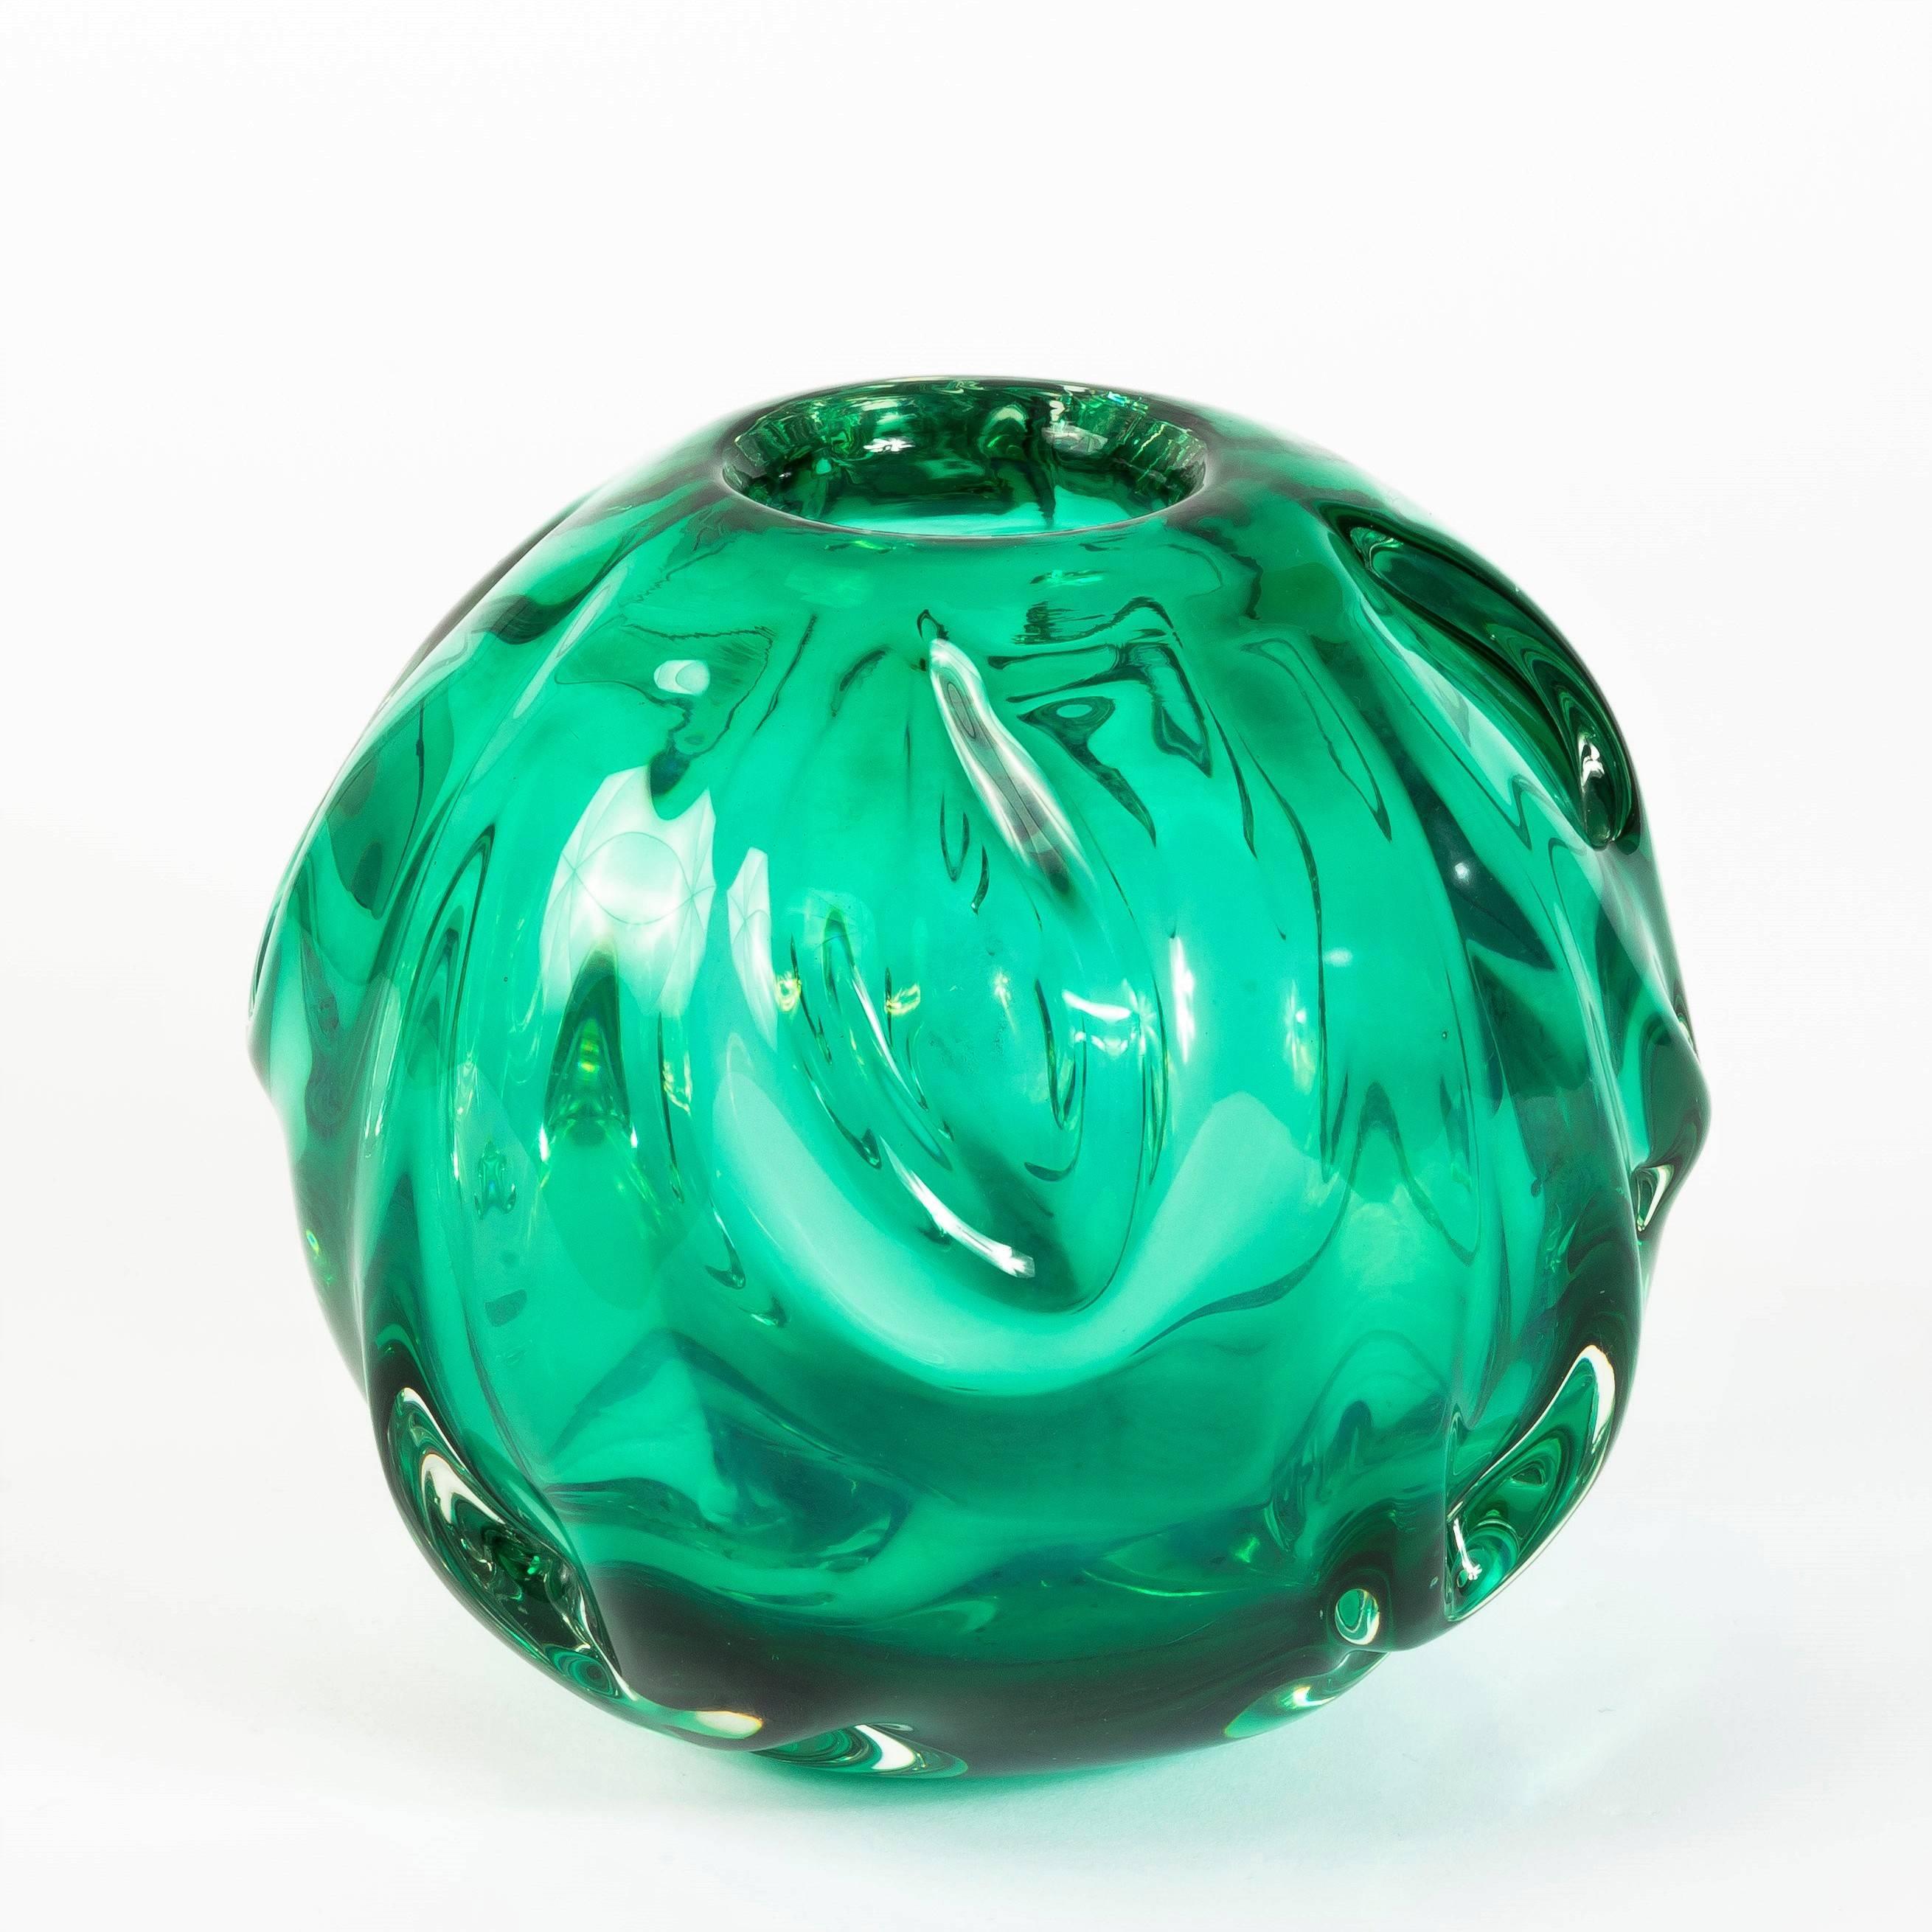 Ball vase in 'verde mare' glass by the Italian glass designer Flavio Poli (1900-1984) and executed by Seguso Vetri d'Arte, glassworks in Murano (IT). Venetian retailer period paper label under the vase.
This vase illustrated in Marc Heiremans,